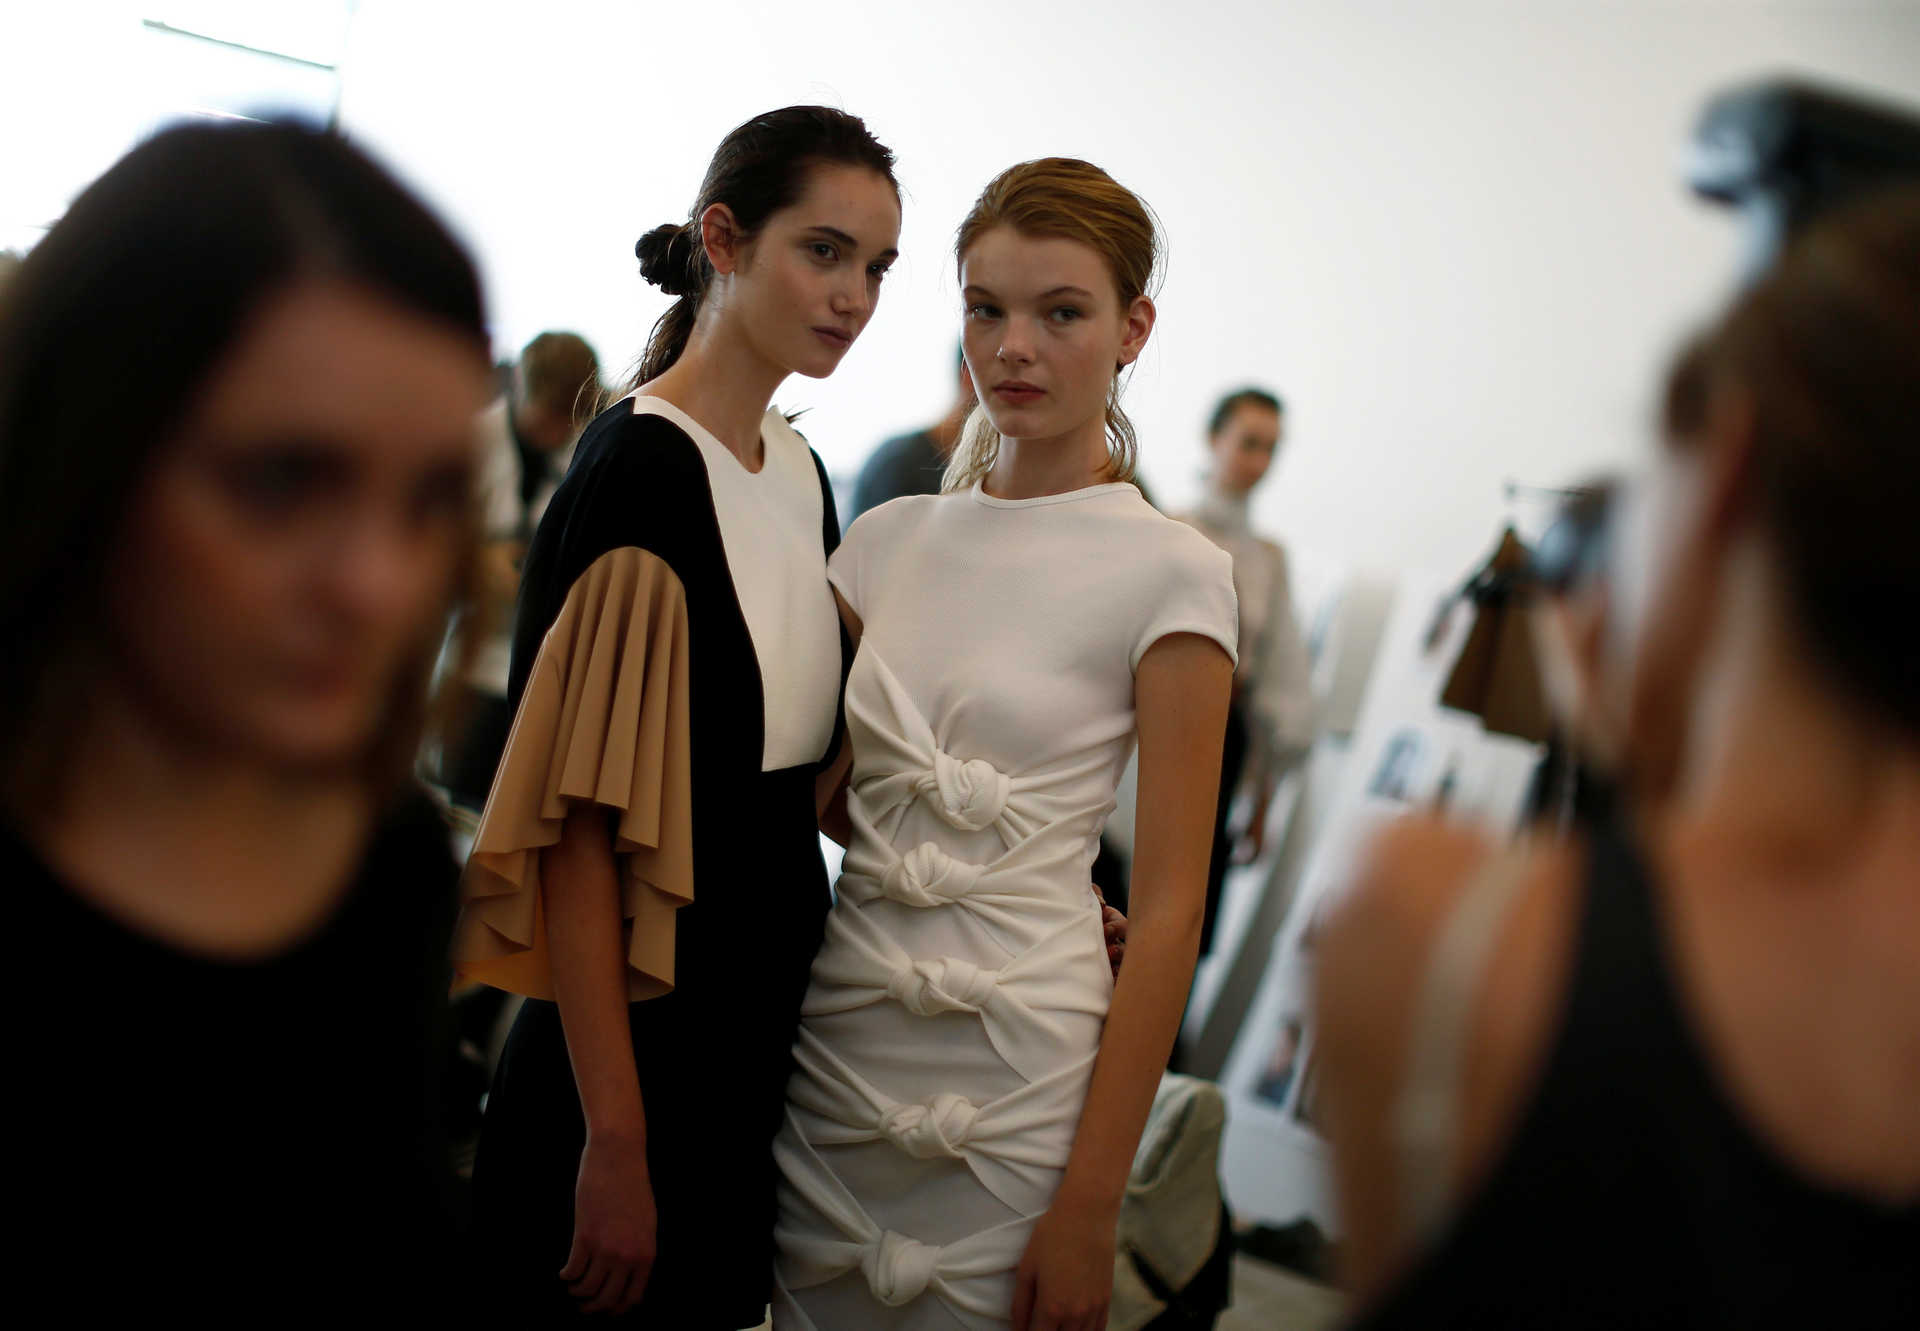 Models pose for a photographer’s picture backstage before the Christopher Esber show at Australian Fashion week in Sydney